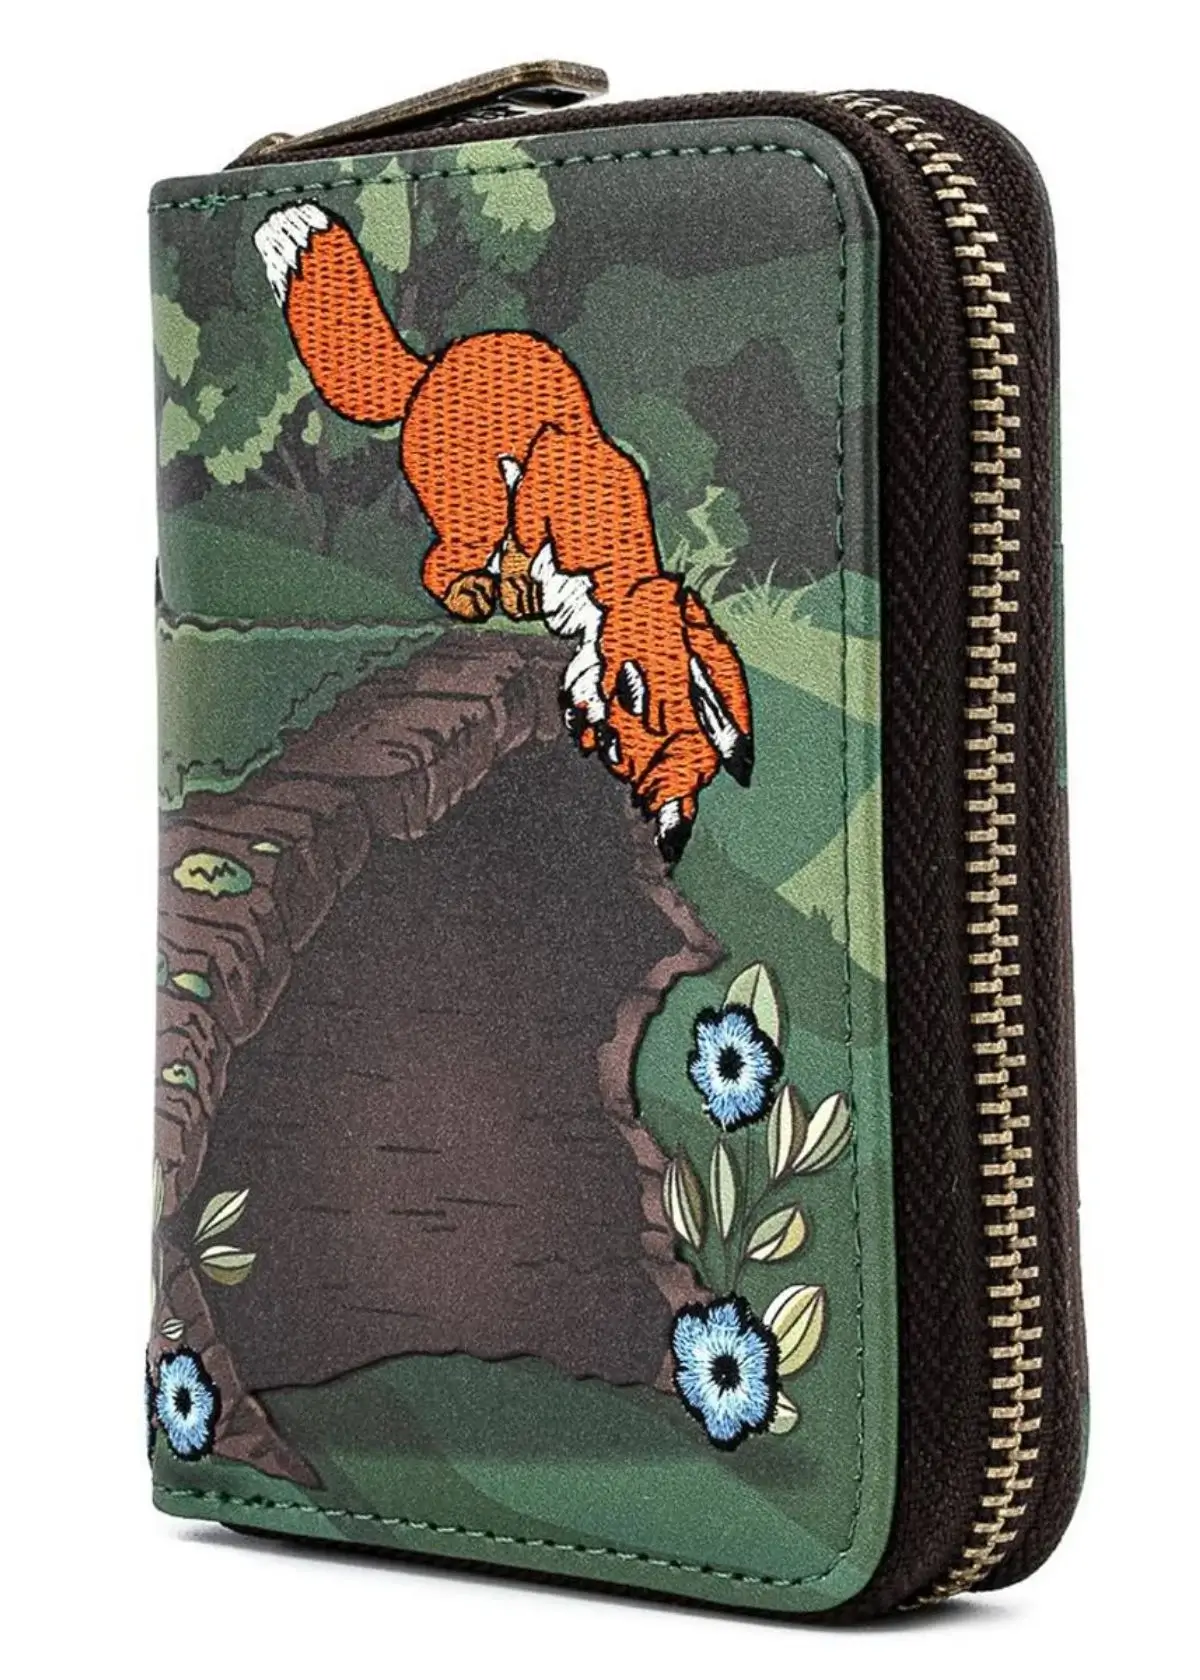 What kind of card slots are available in Fox wallets?